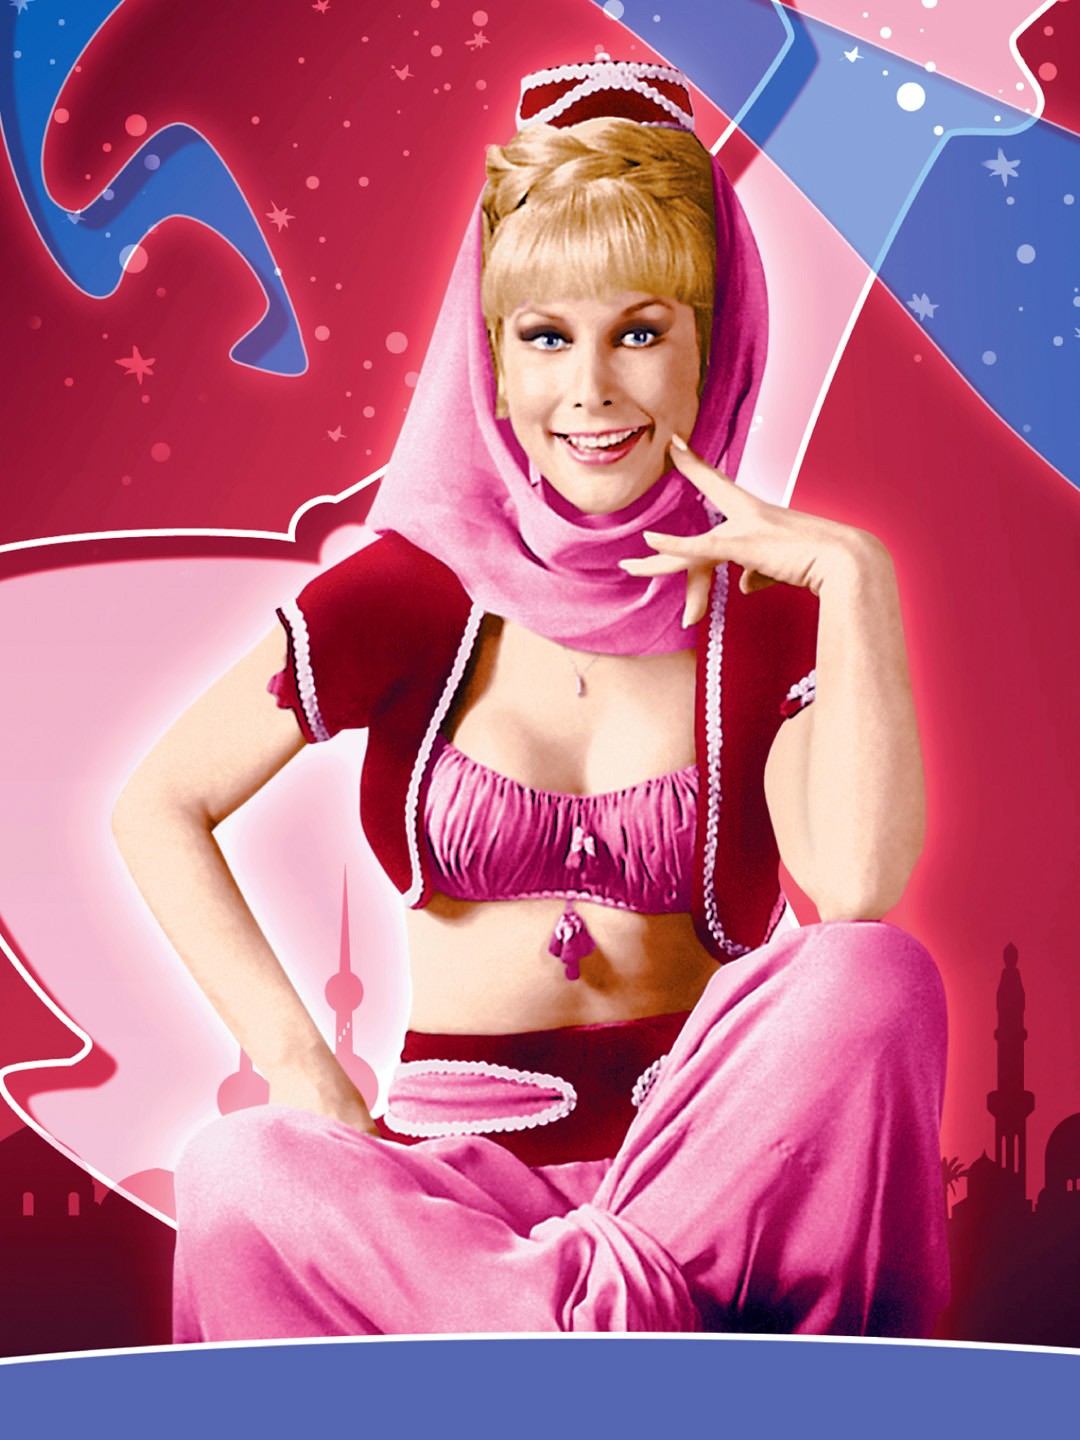 andrie susilo recommends i dream of jeannie photos pic